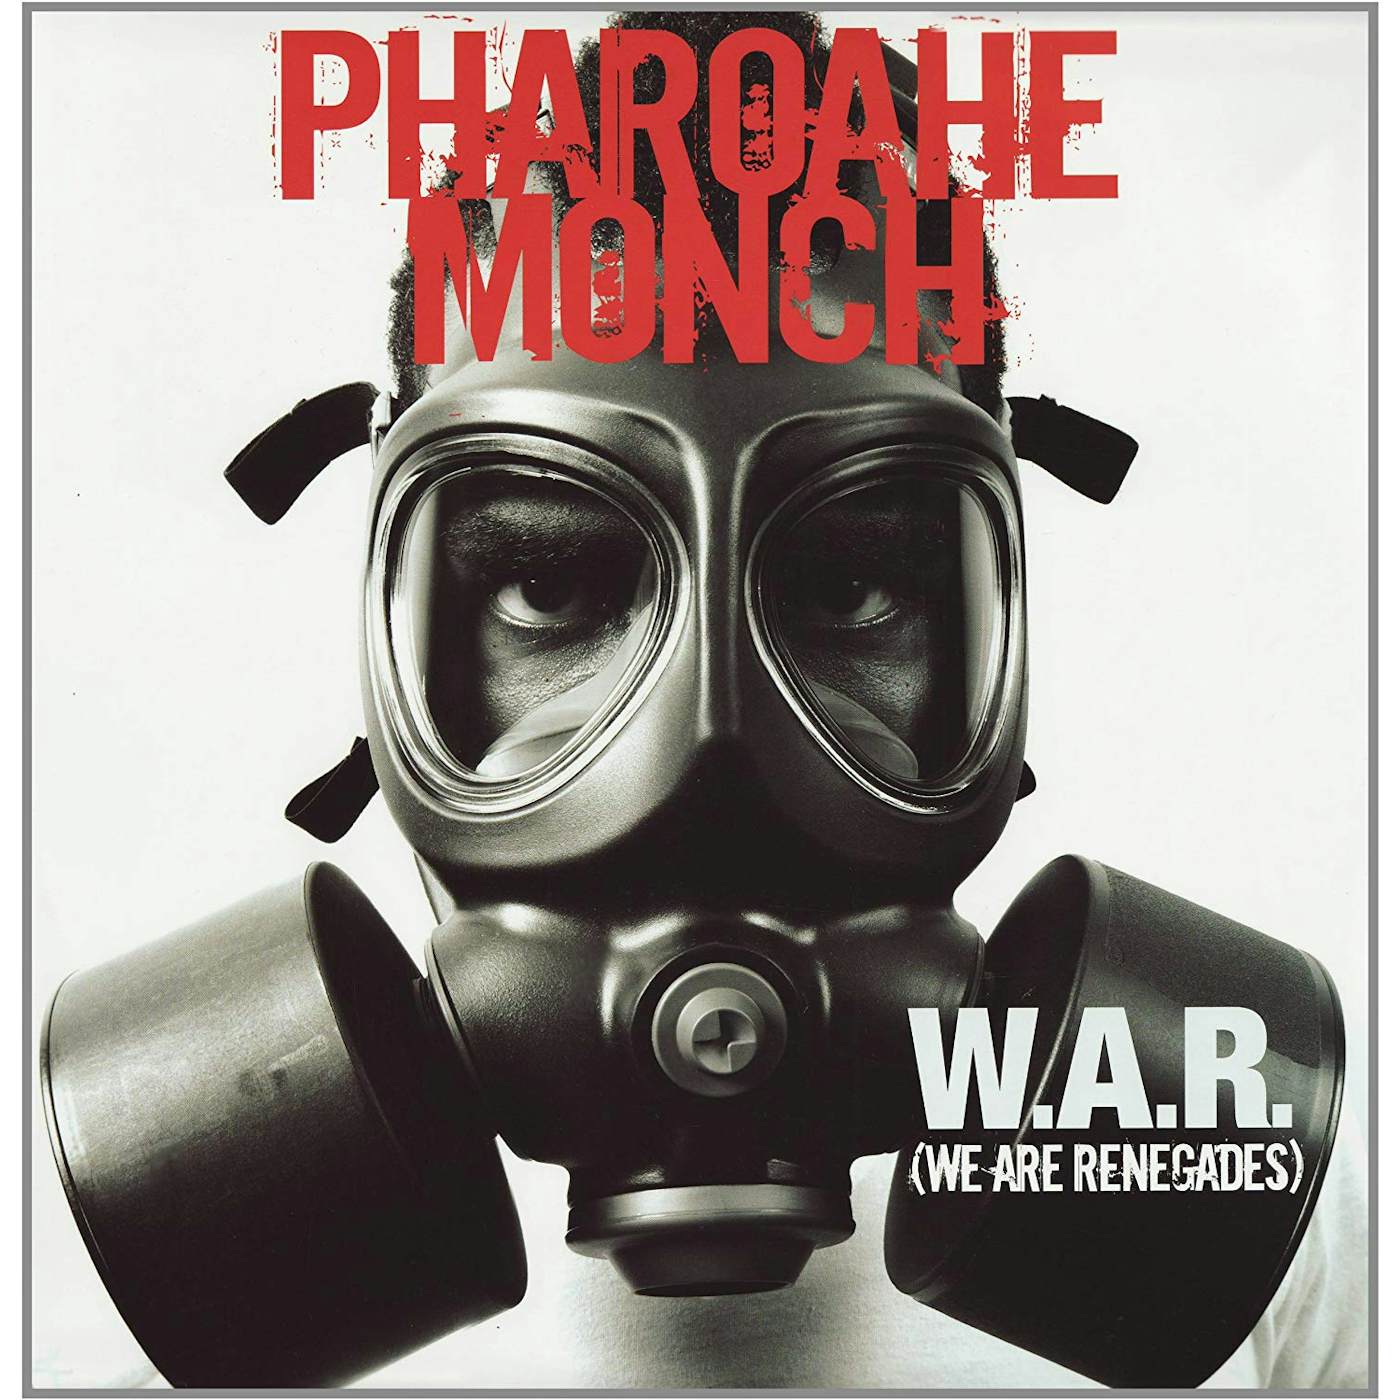 Pharoahe Monch W.A.R. (We Are Renegades) Vinyl Record